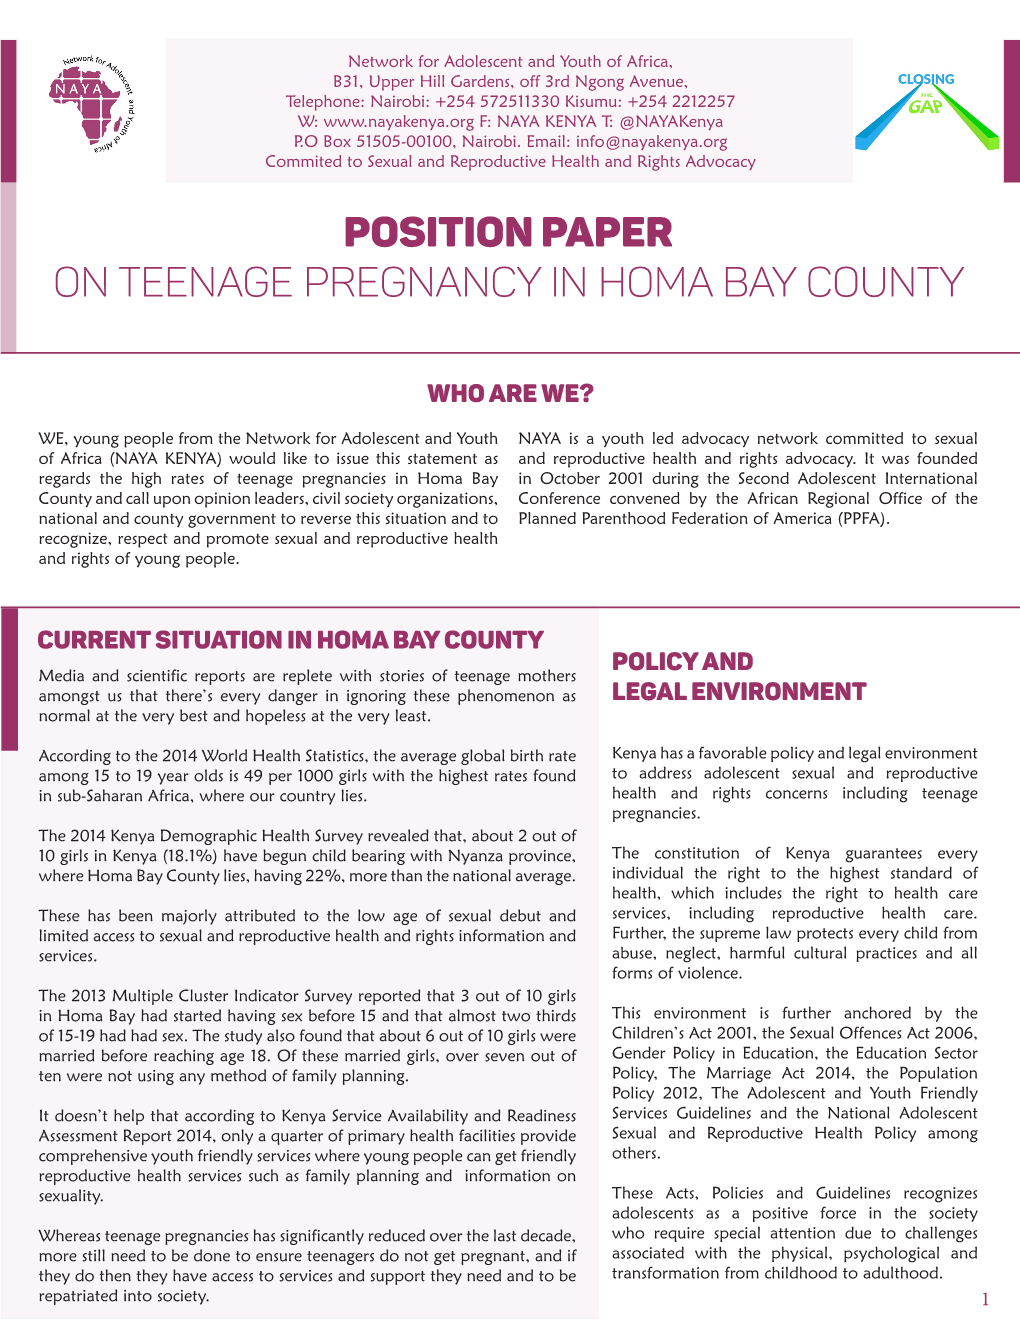 Position Paper on Teenage Pregnancy in Homa Bay County